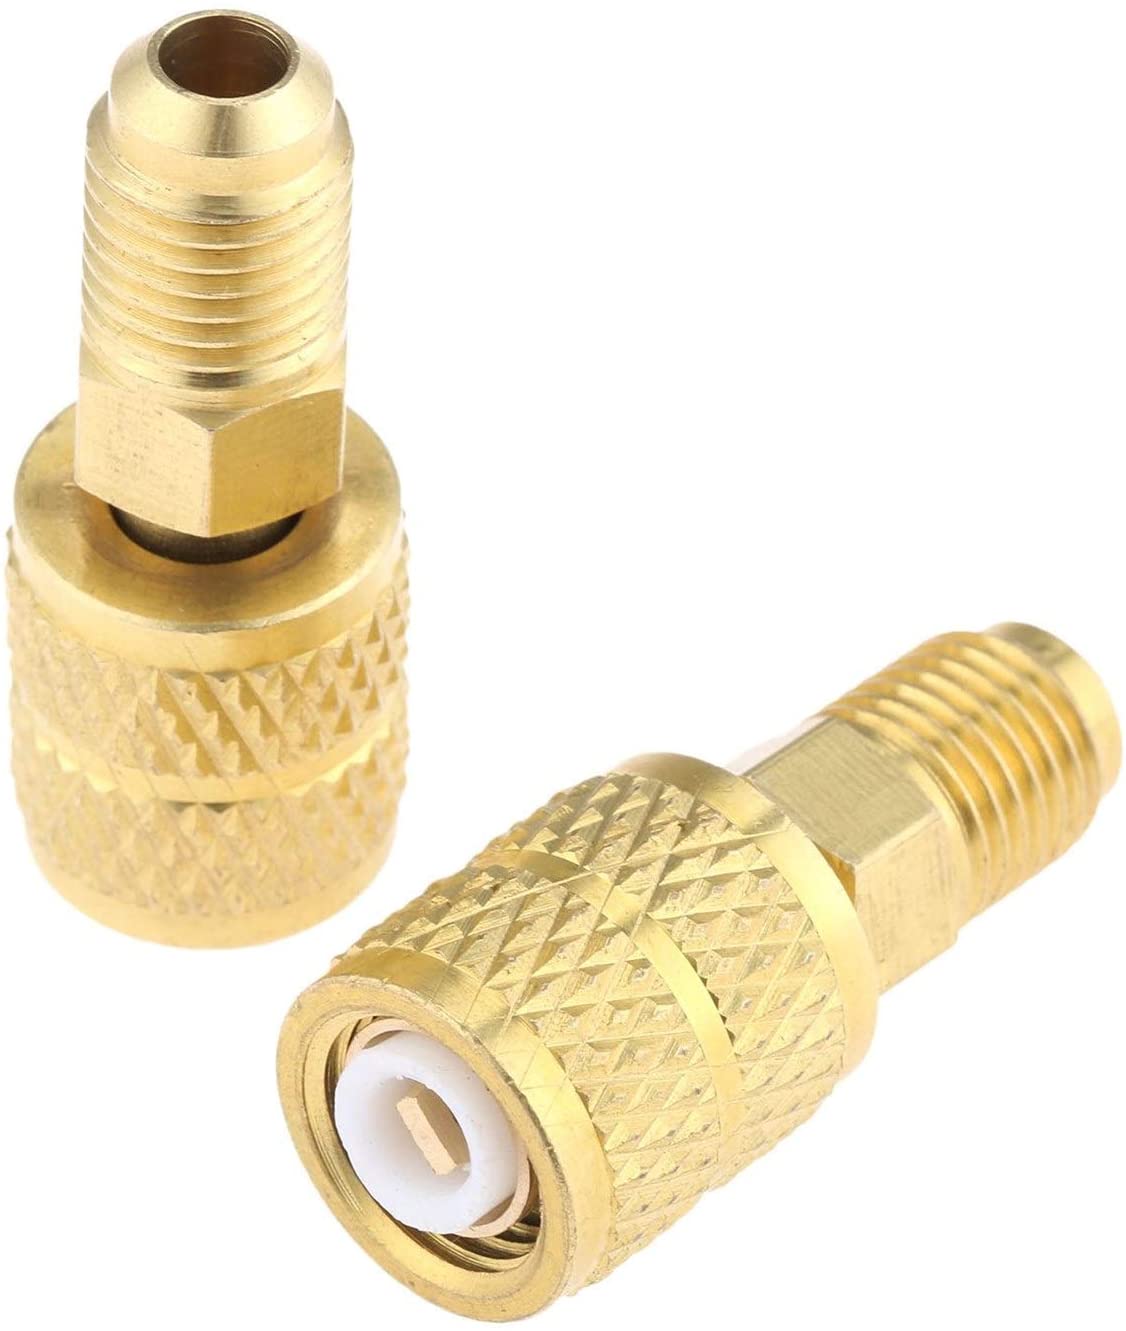 WENJING Be Quiet Mall 2Pcs R410a Straight Adapter 5/16